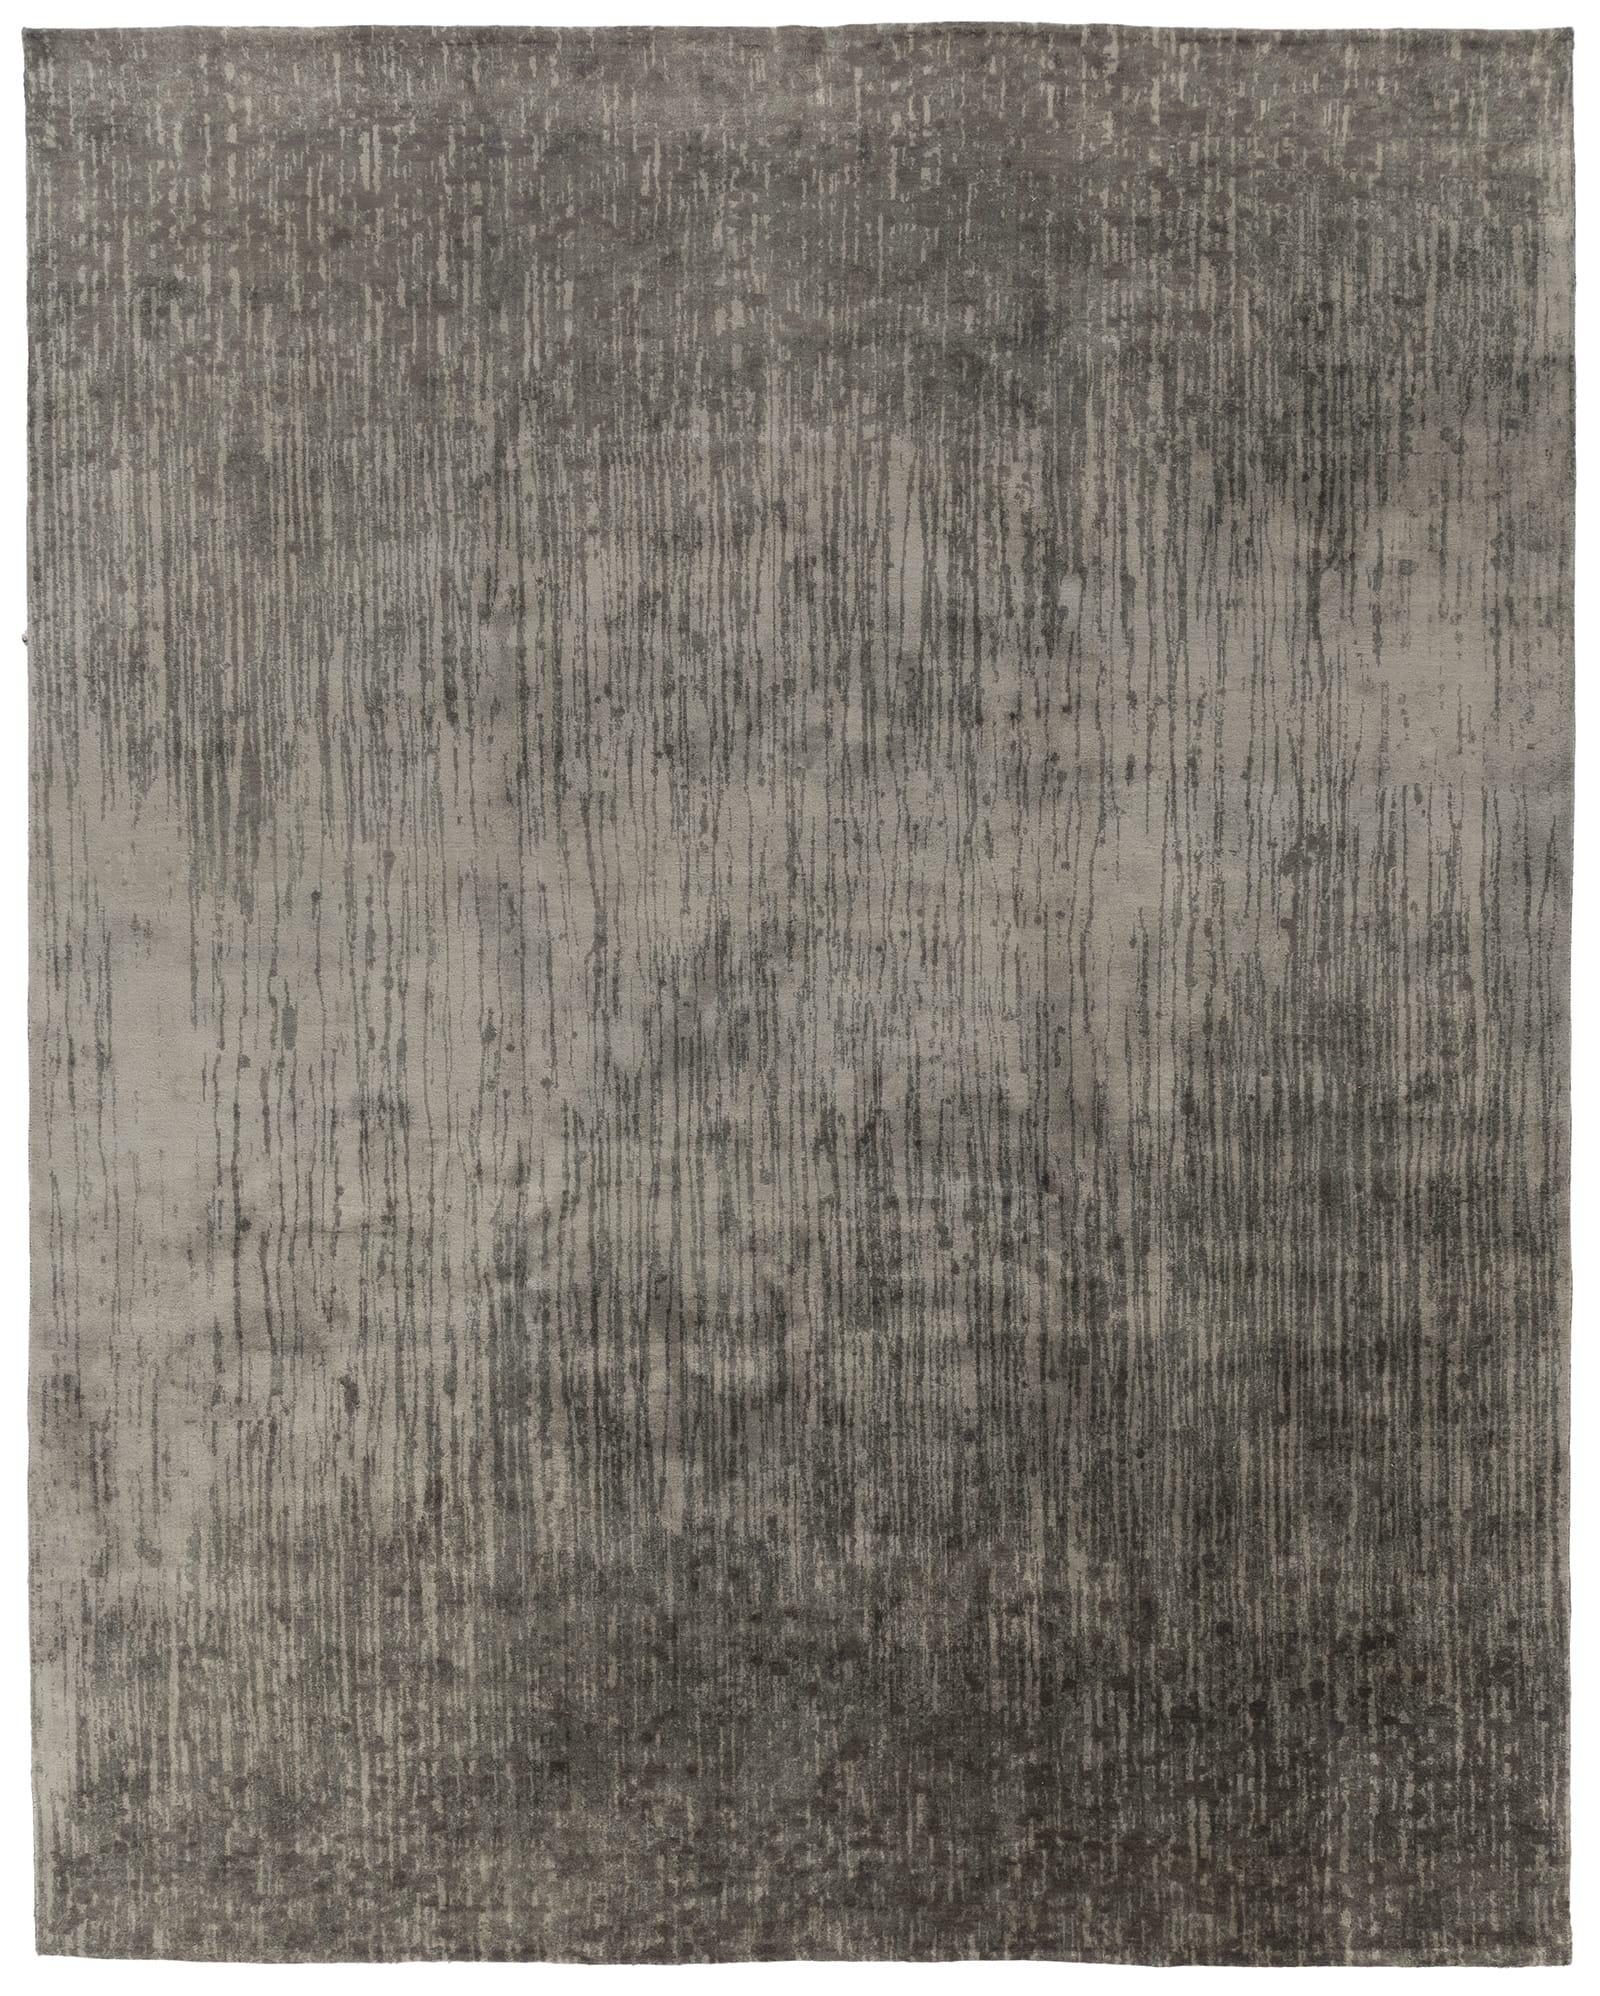 Art Nouveau Tufenkian Carpets, Waterfall Charcoal, Contemporary/Modern, Greys For Sale